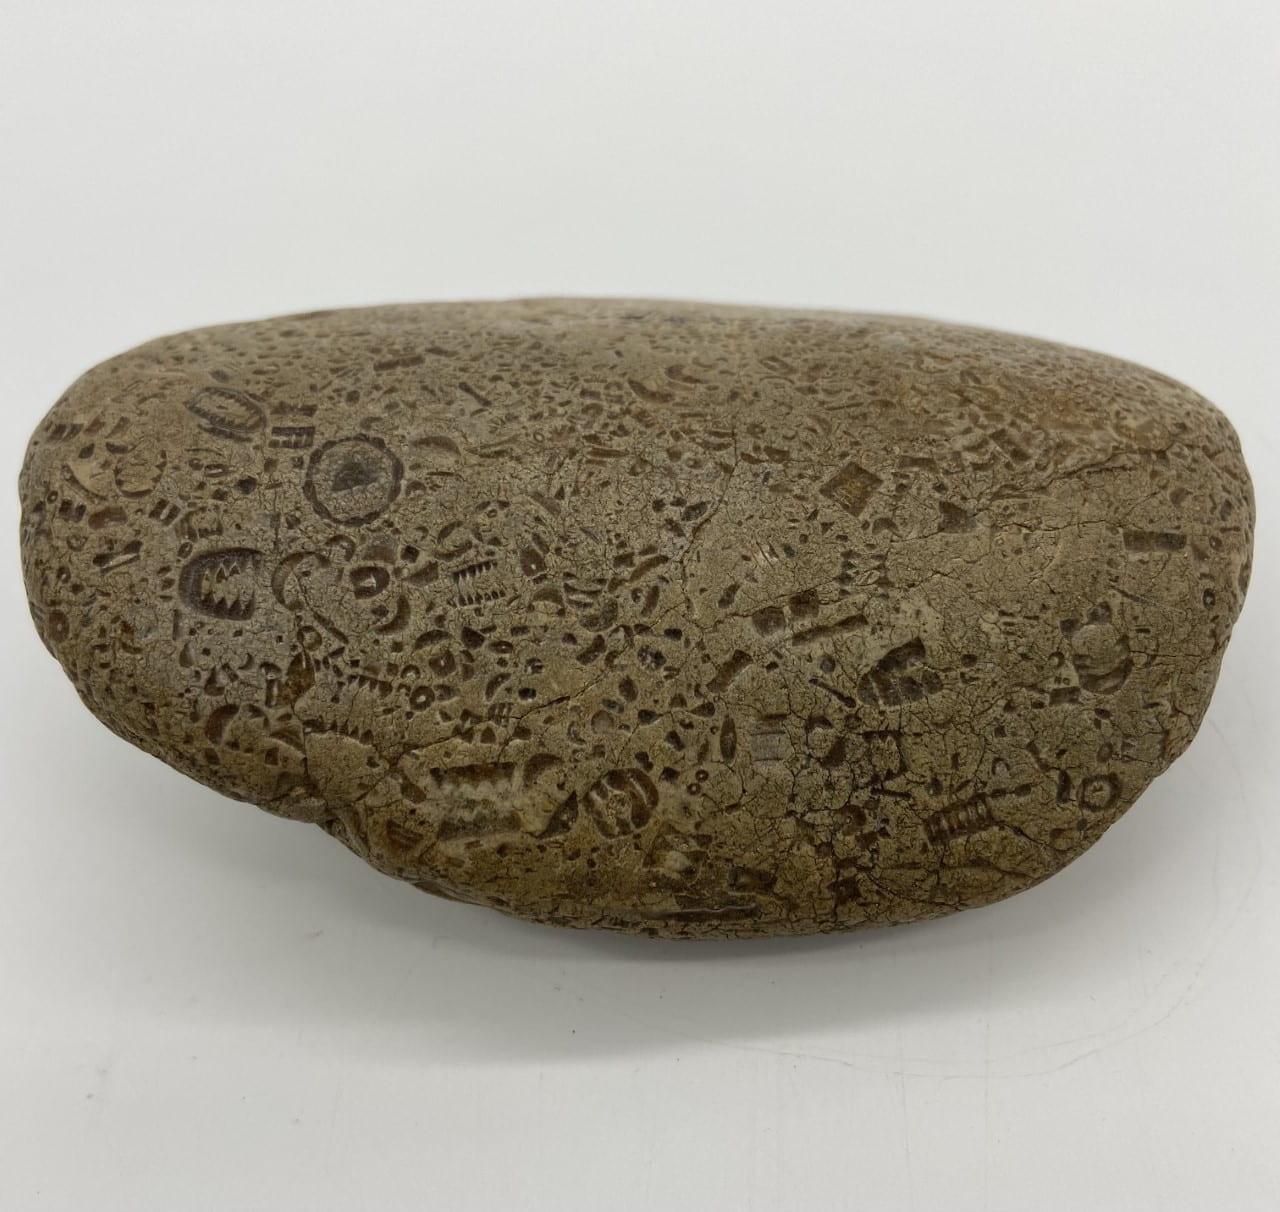 An irregularly shaped rock against a white surface with fossil impressions throughout it.